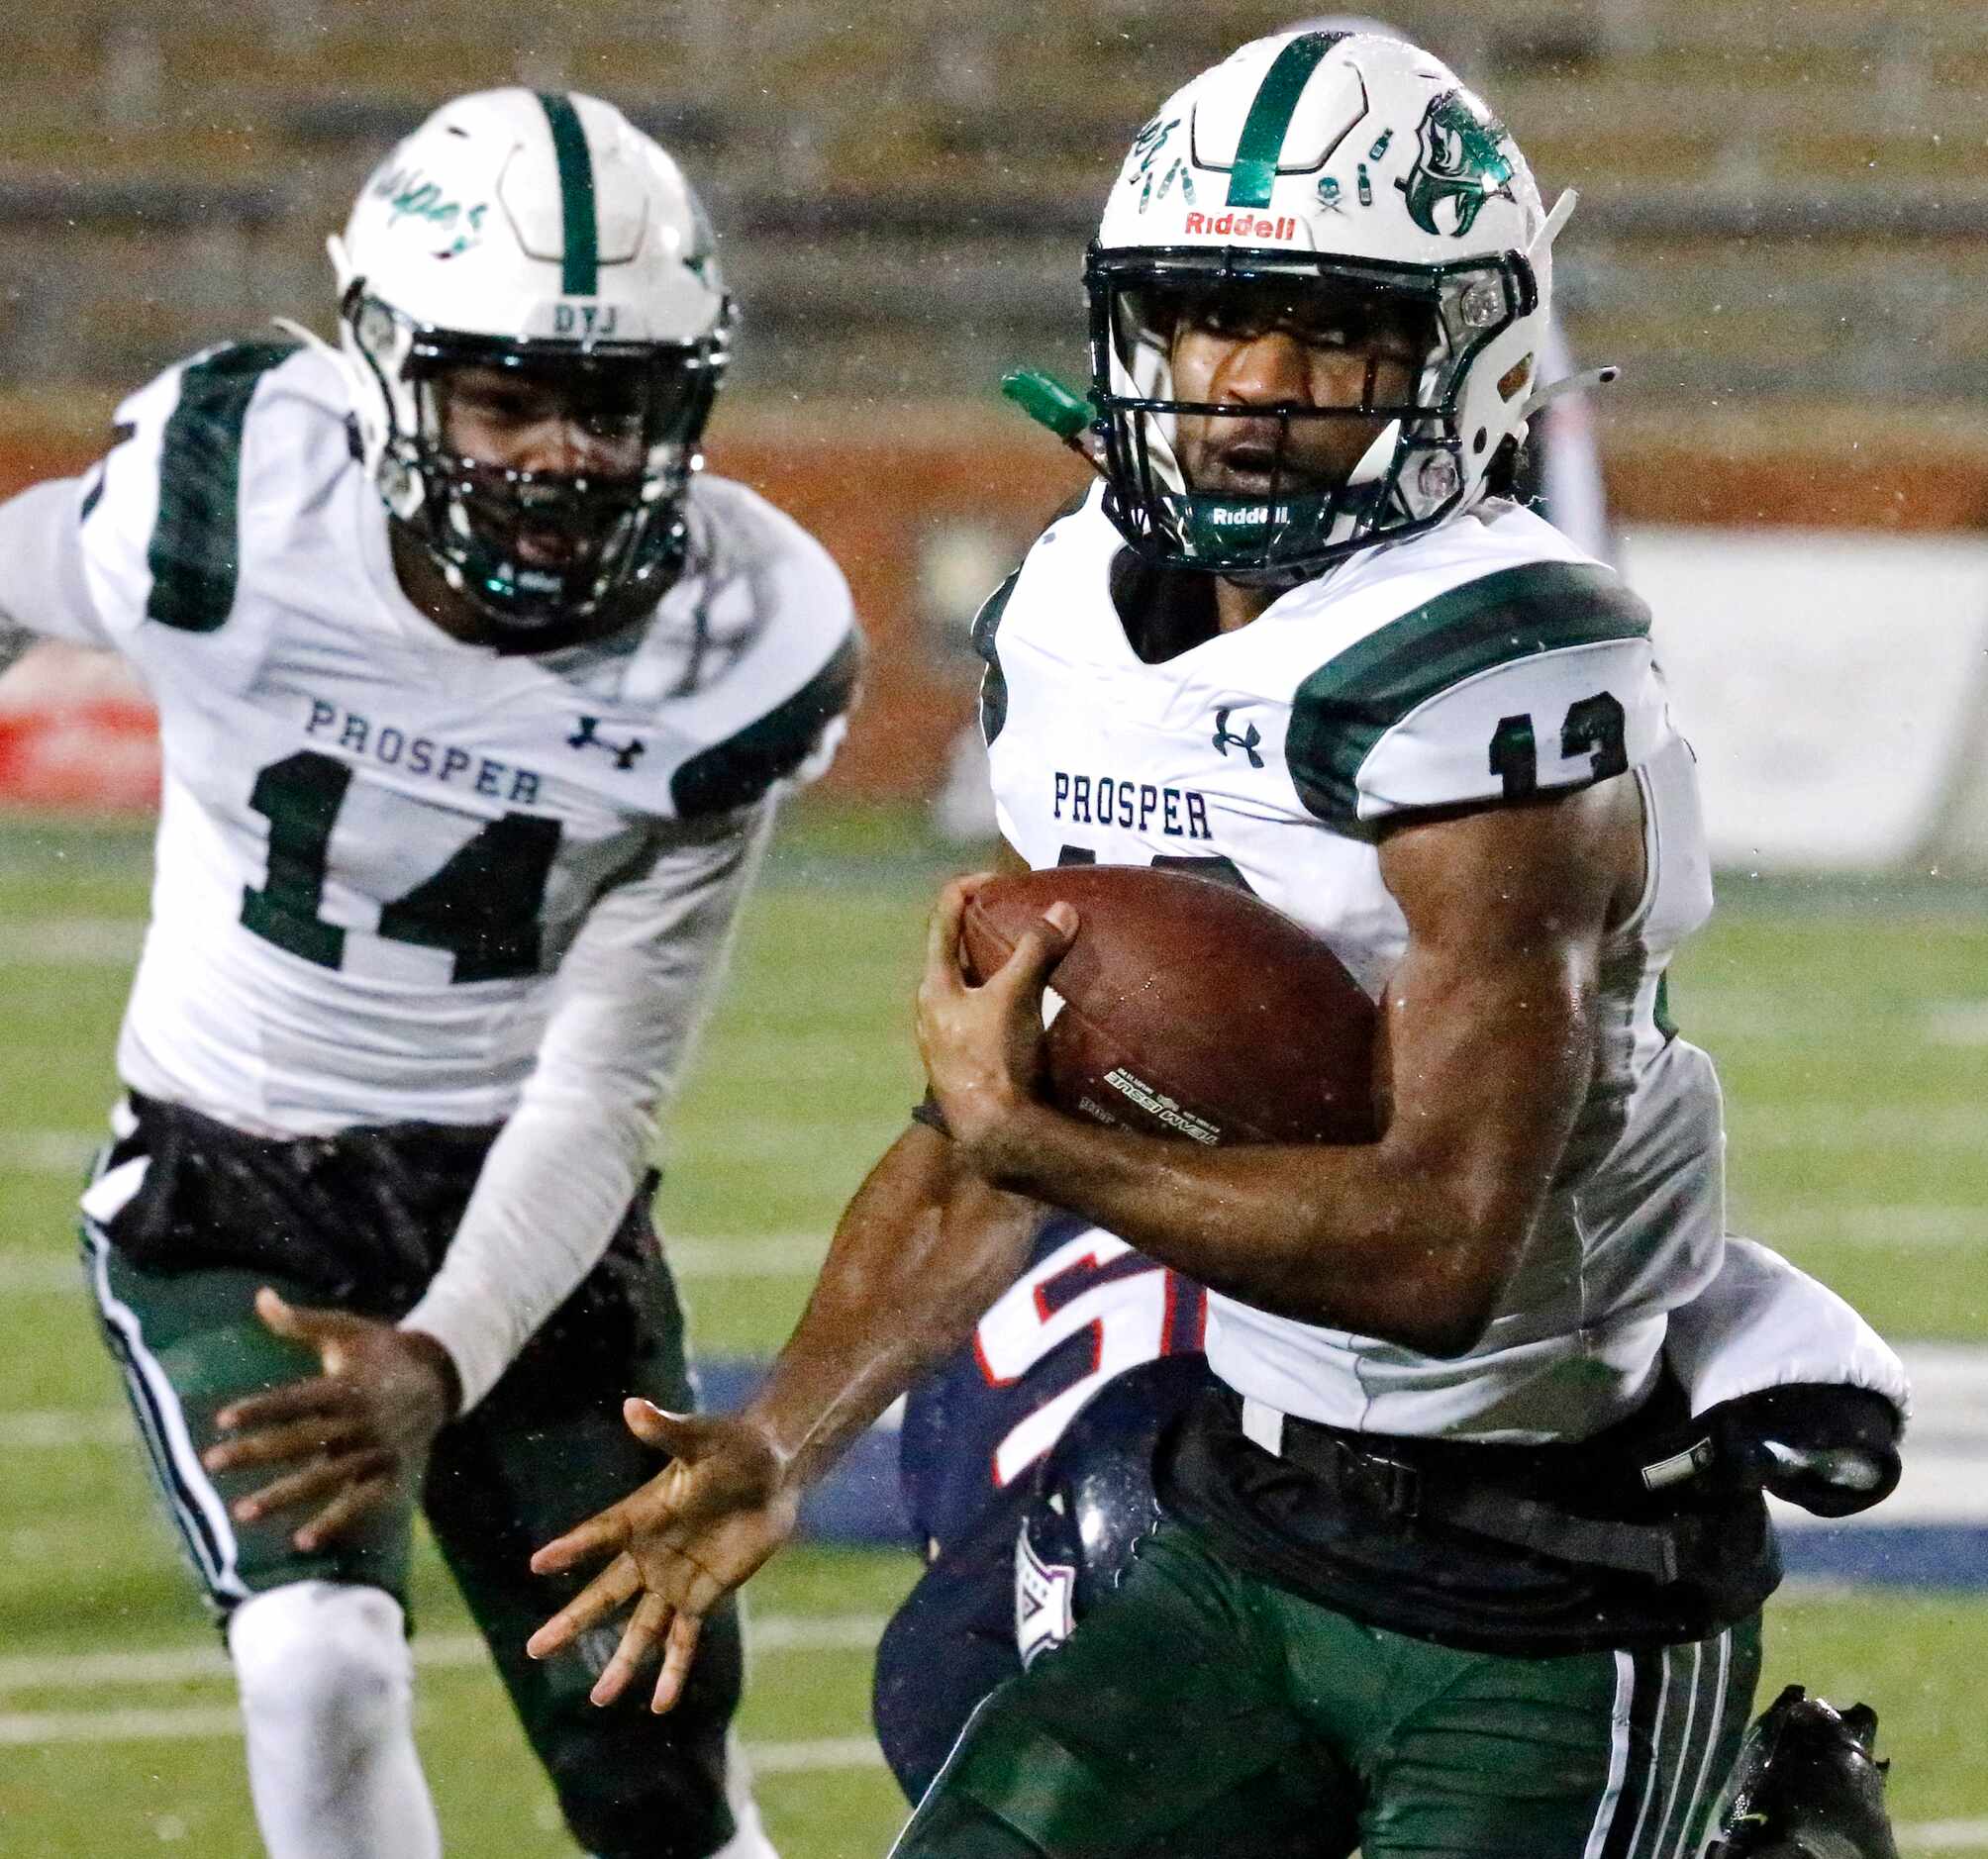 Prosper High School running back Prentice Sanders (13) carries the ball close to the end...